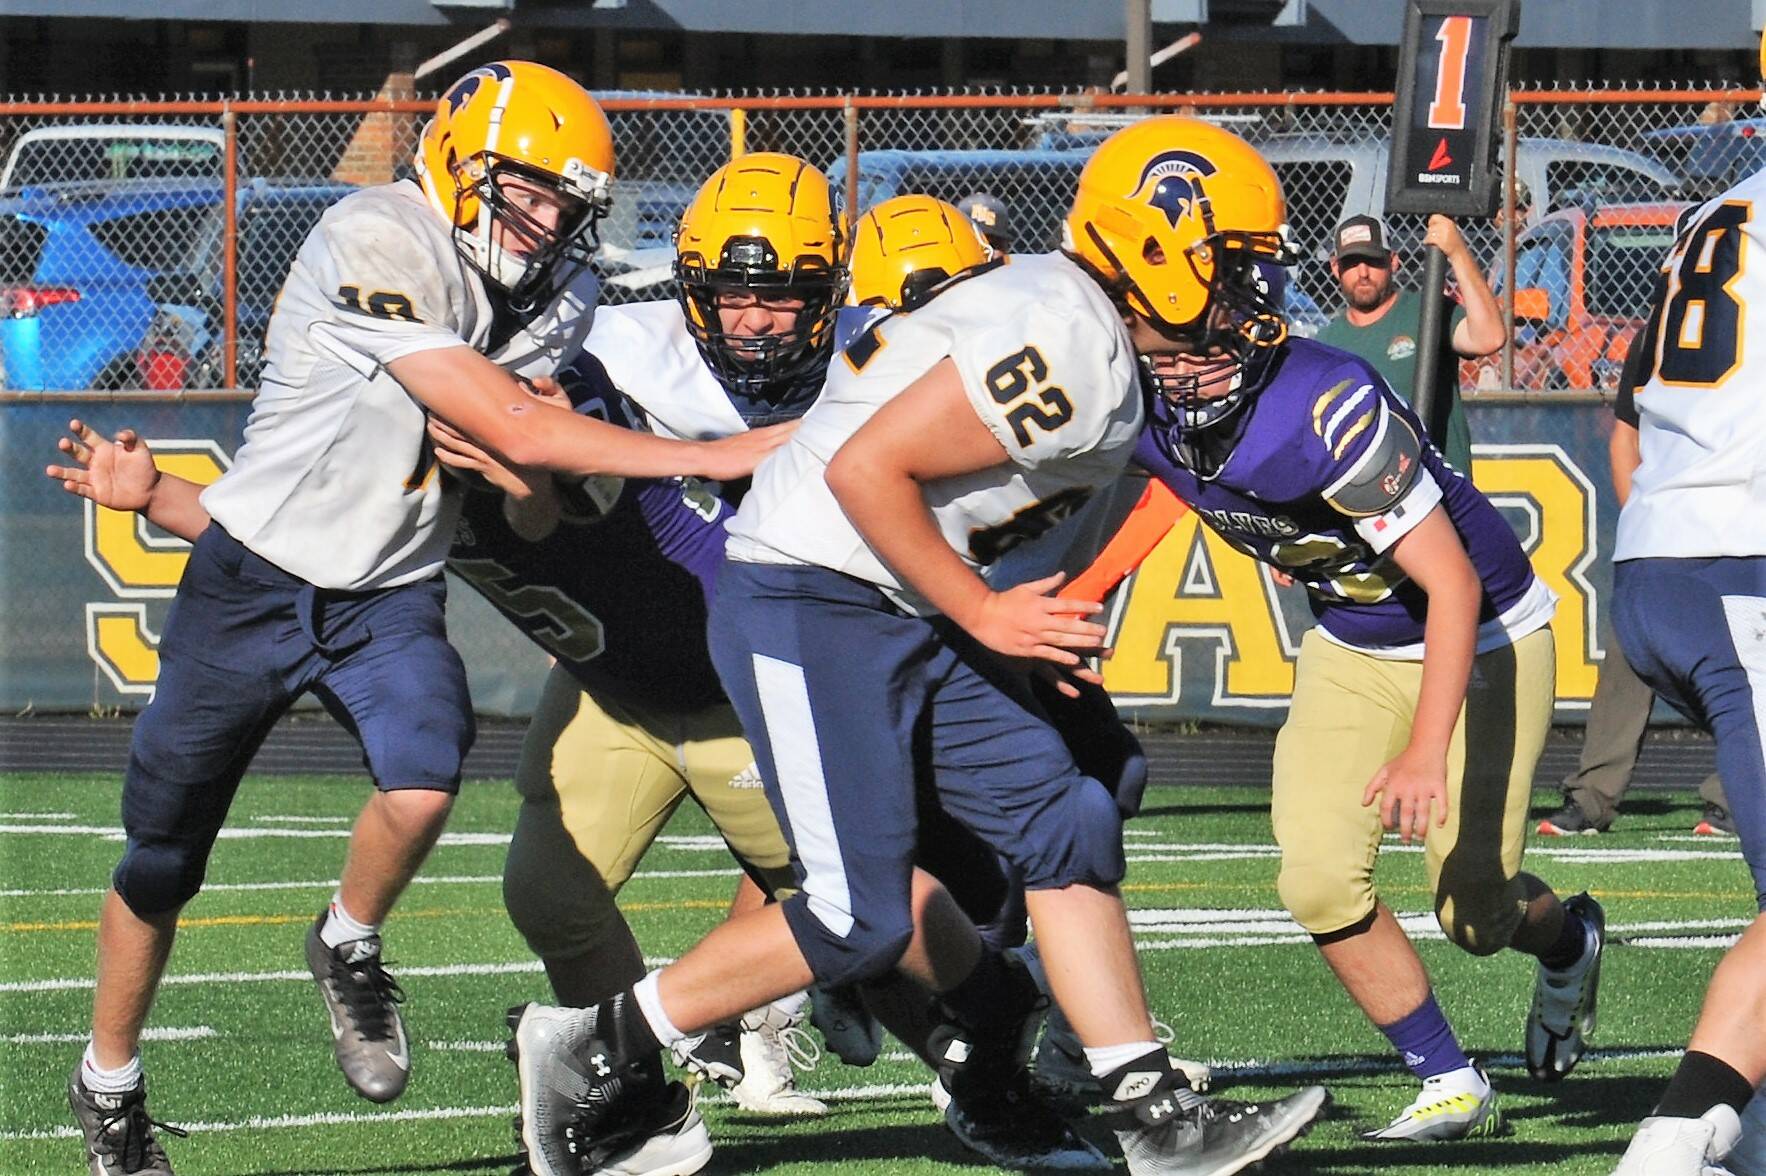 In JV action Forks defeated Sequim 38 to 0 on Tuesday, Sept. 6 on the Spartan Turf under sunny weather. Pictured here Spartan Landen Olson (10) scores the extra points behind the blocking of Robert Lohneis (62). Photo by Lonnie Archibald